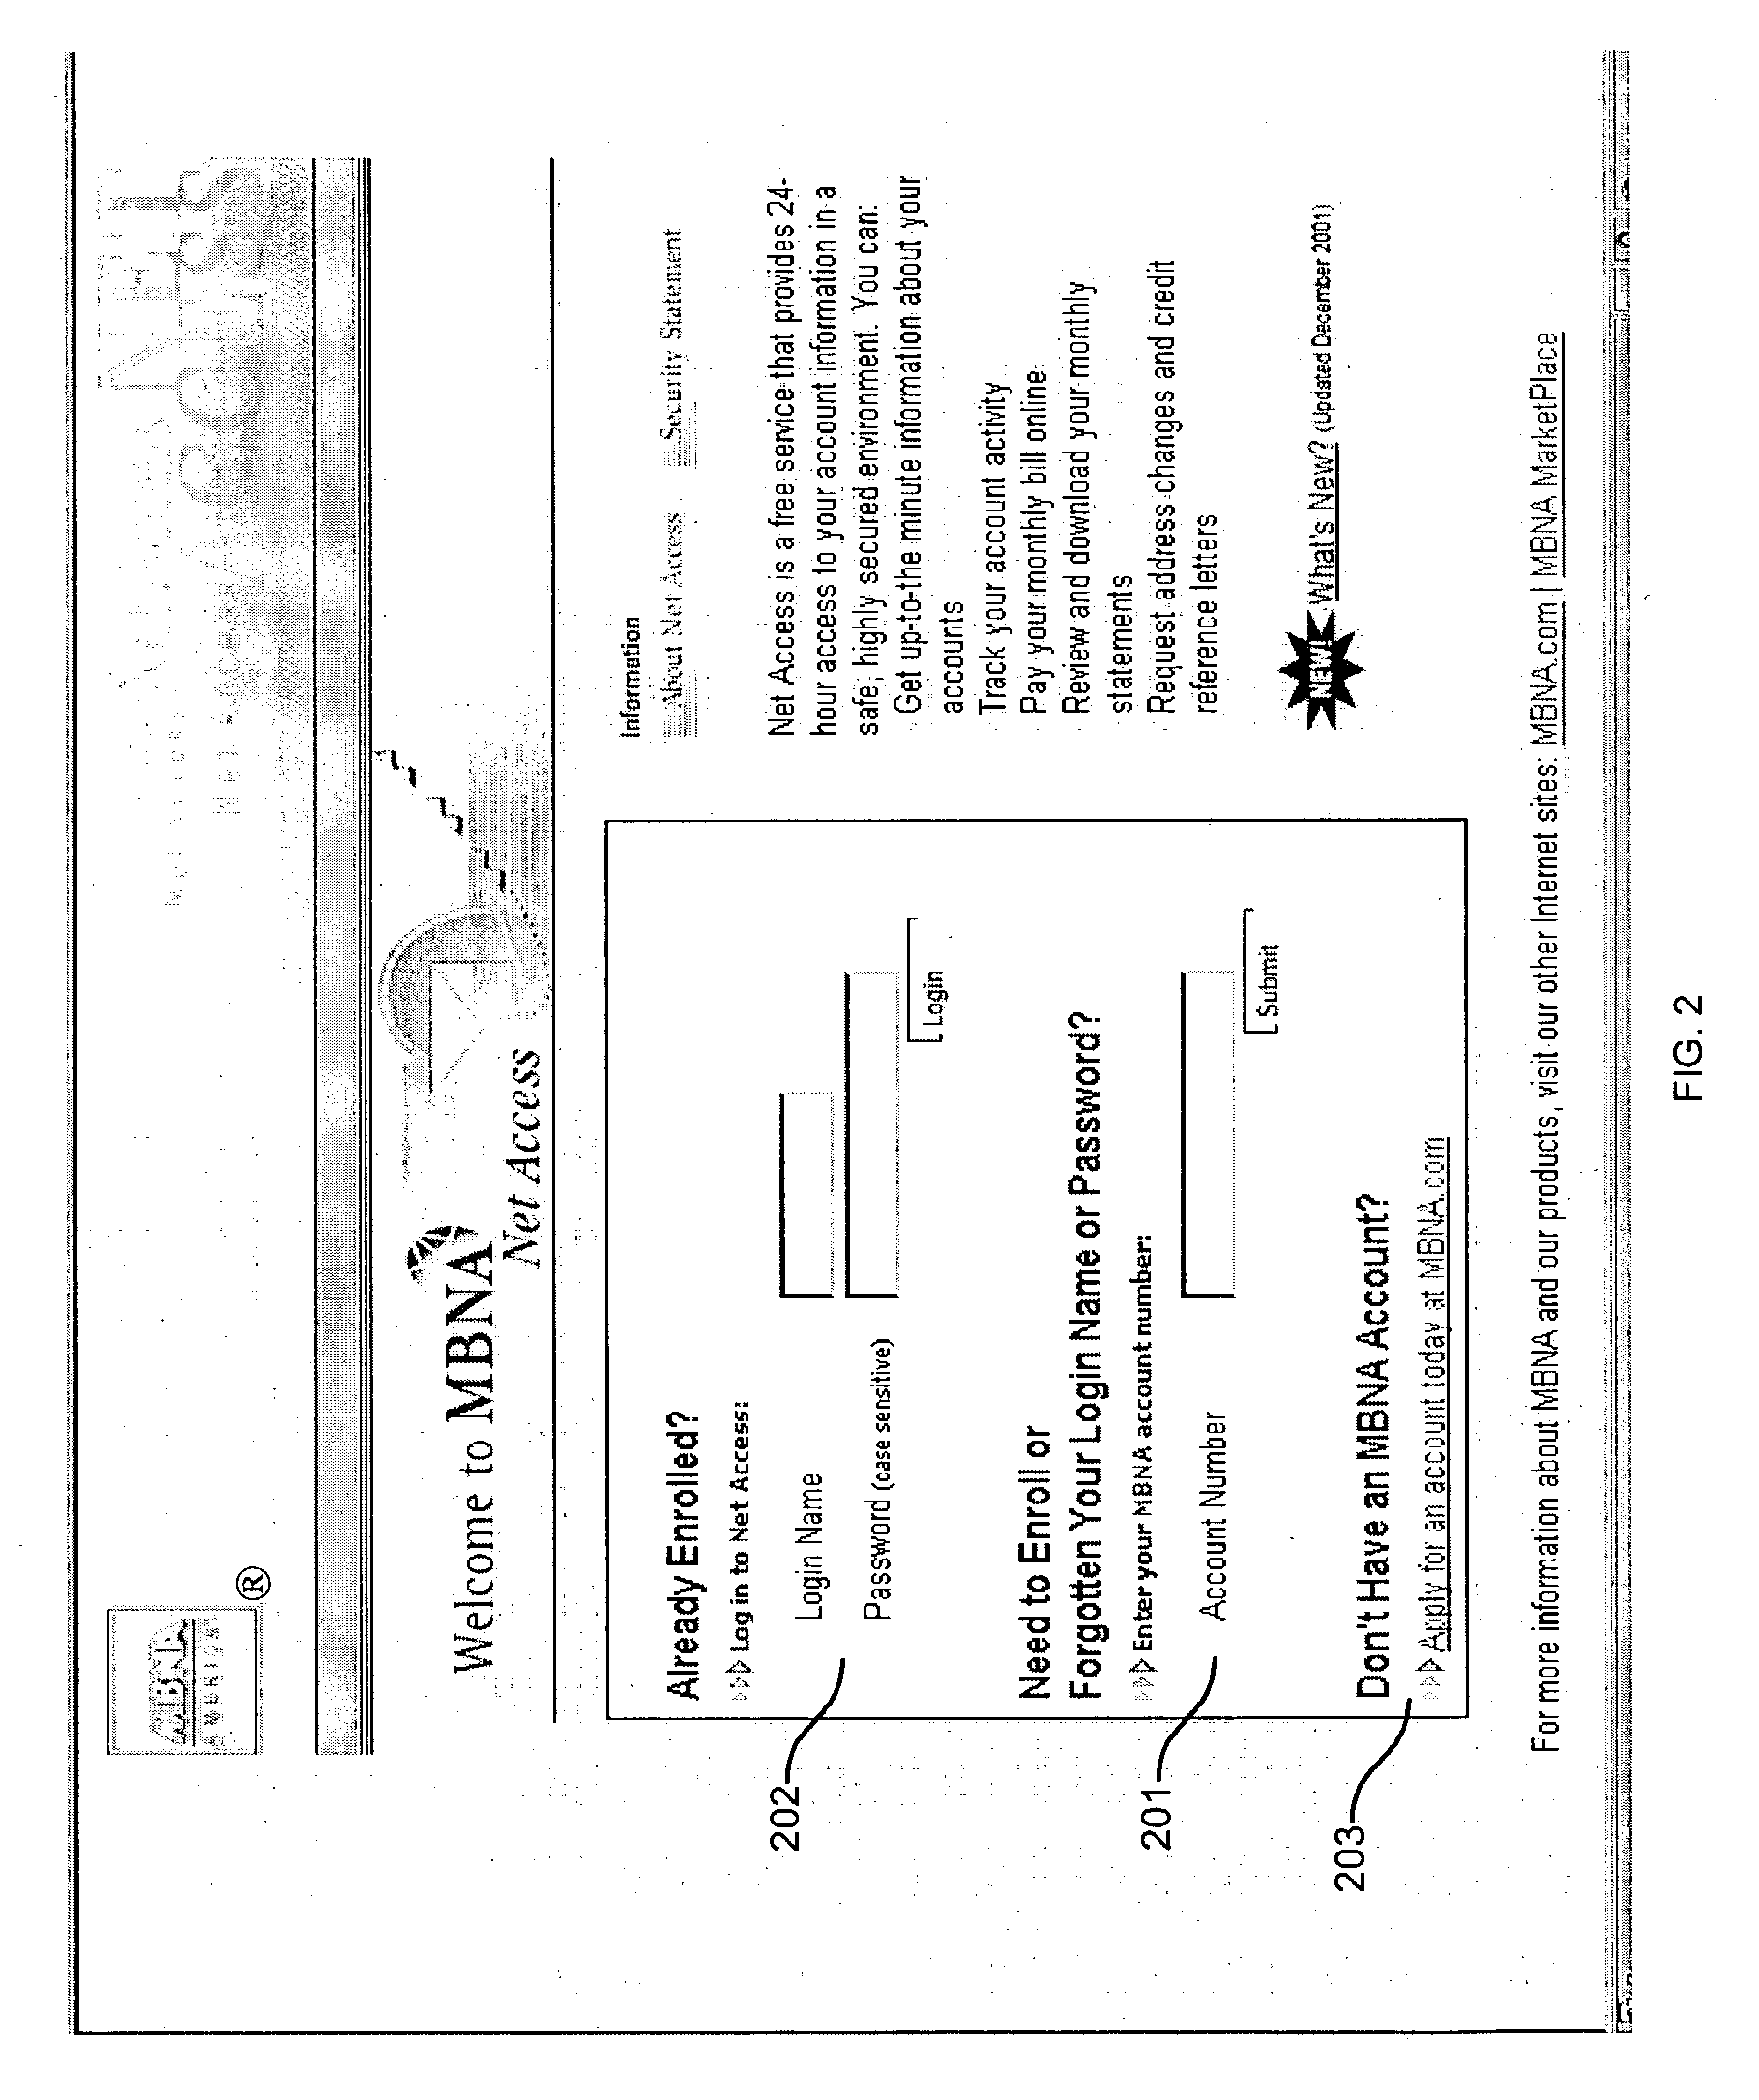 System for providing an online account statement having hyperlinks